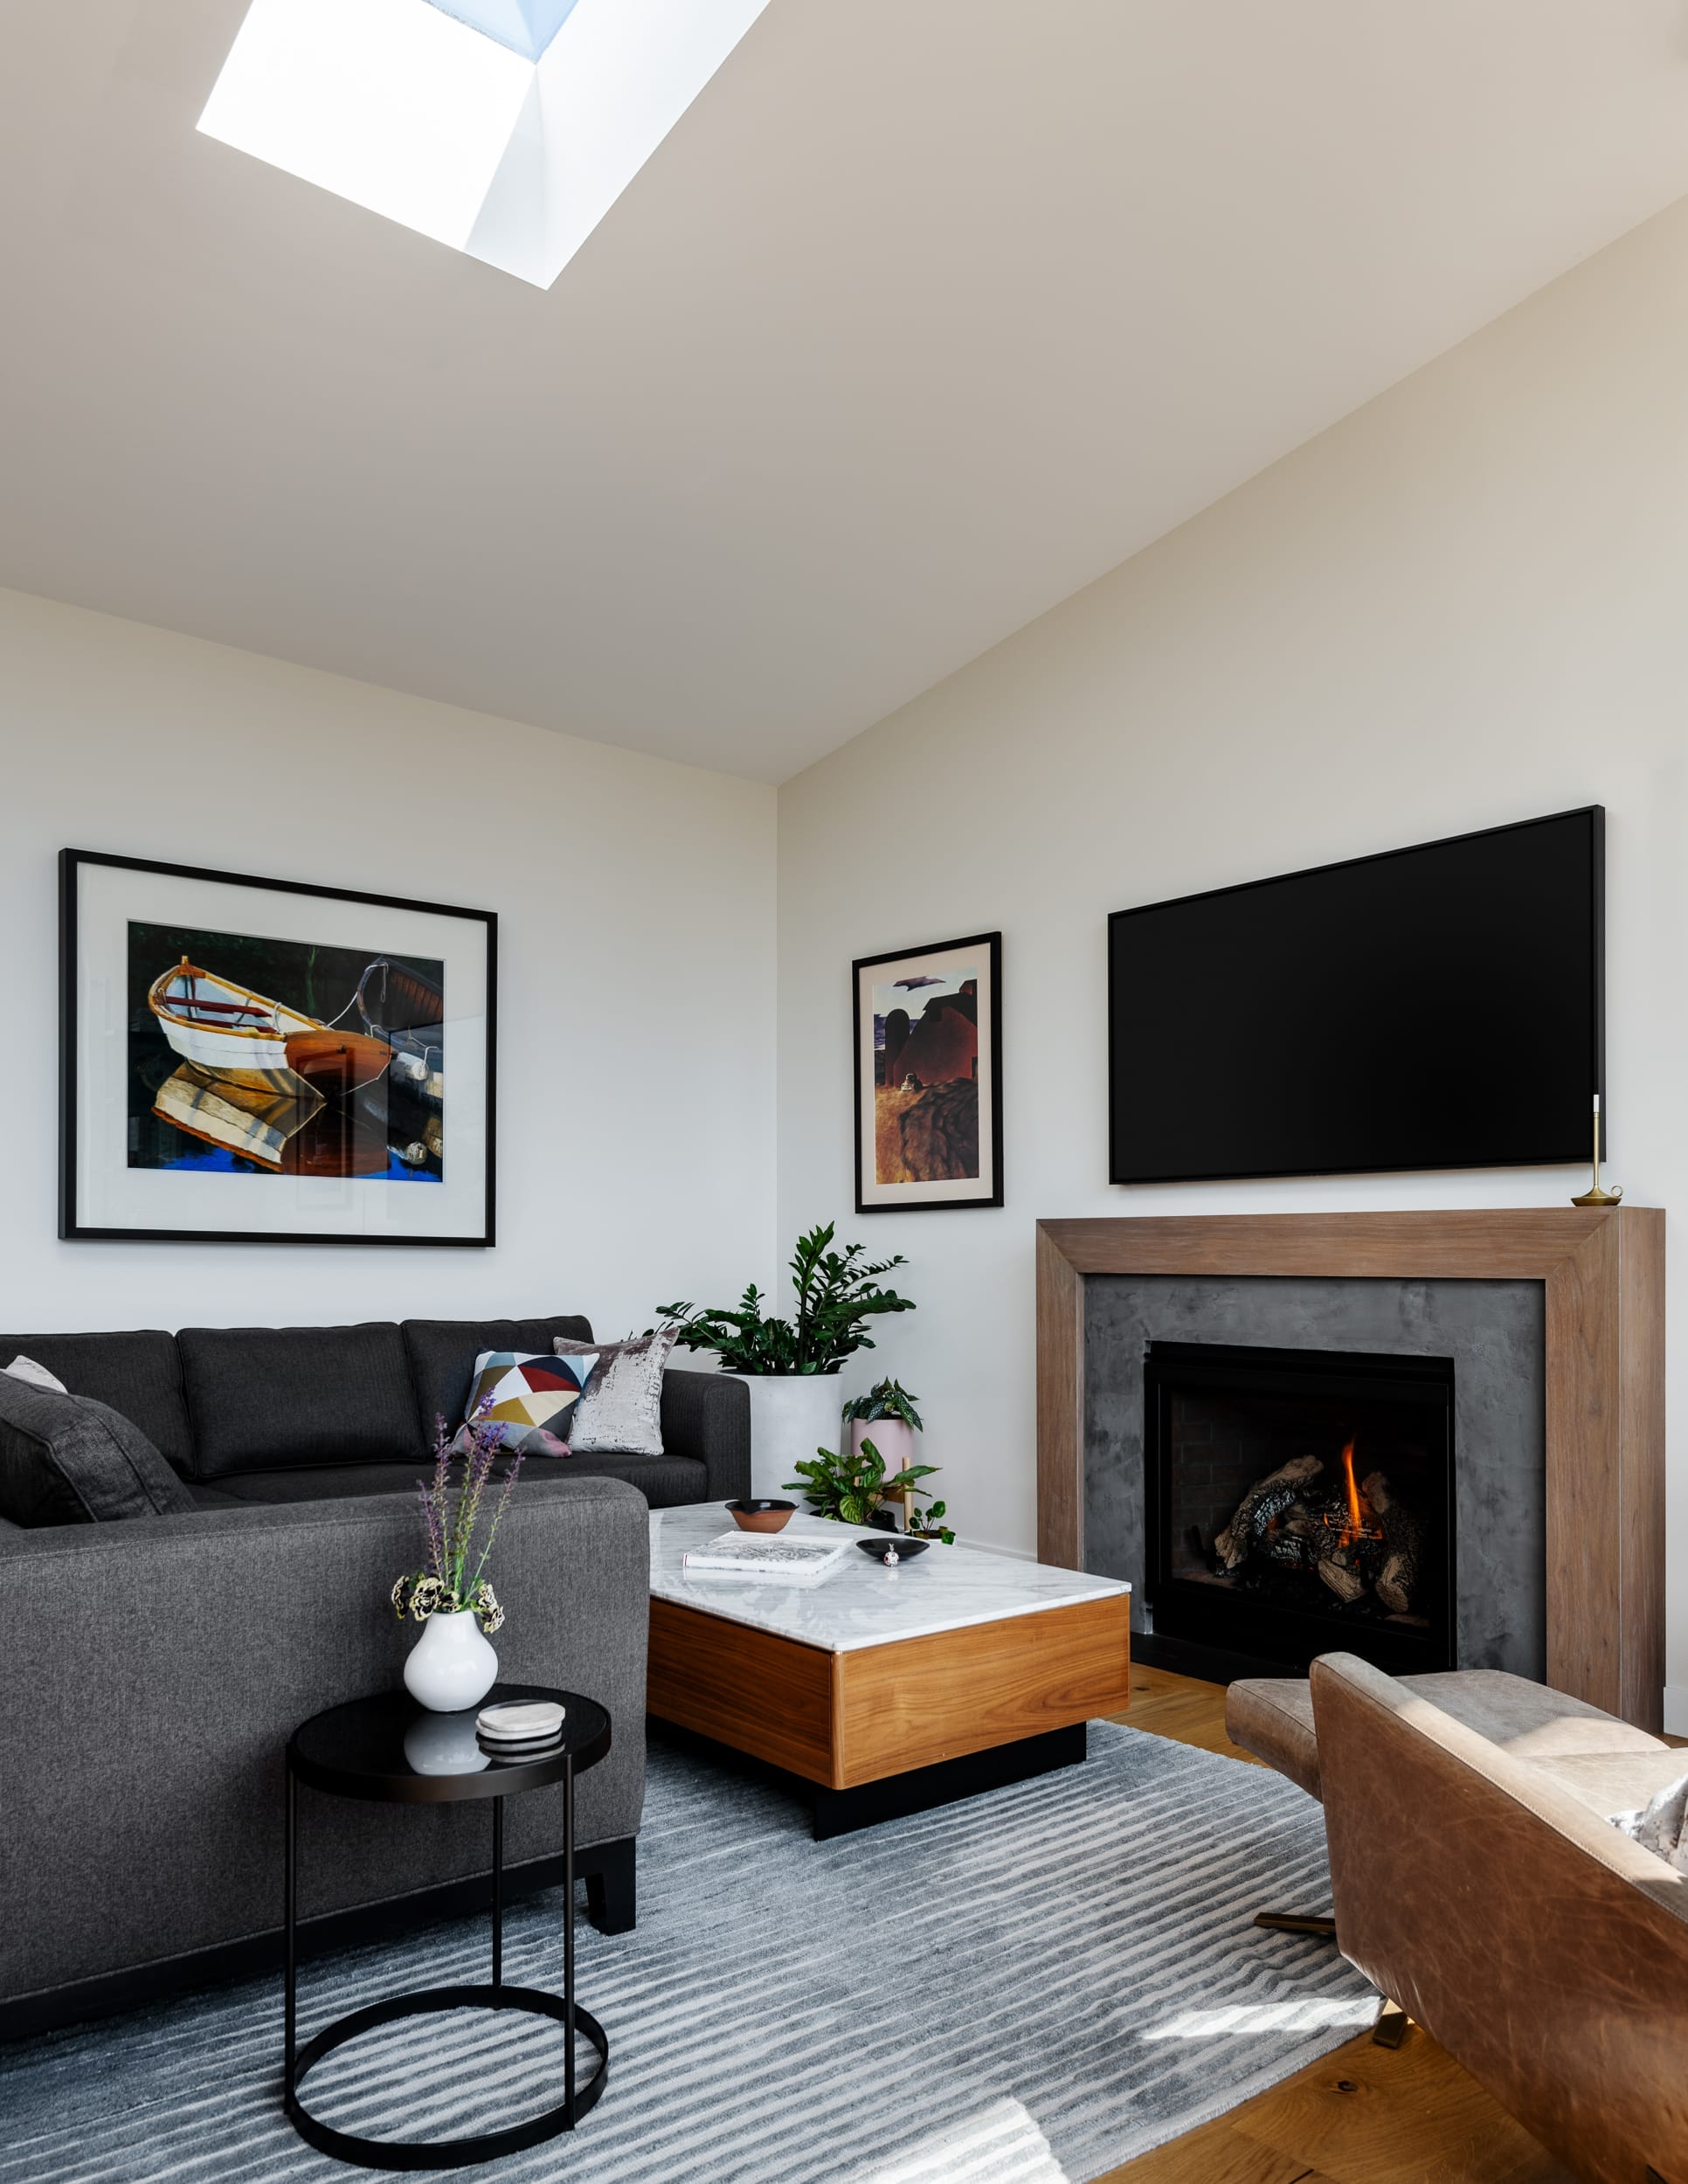 A modern living room with a skylight over the fireplace.